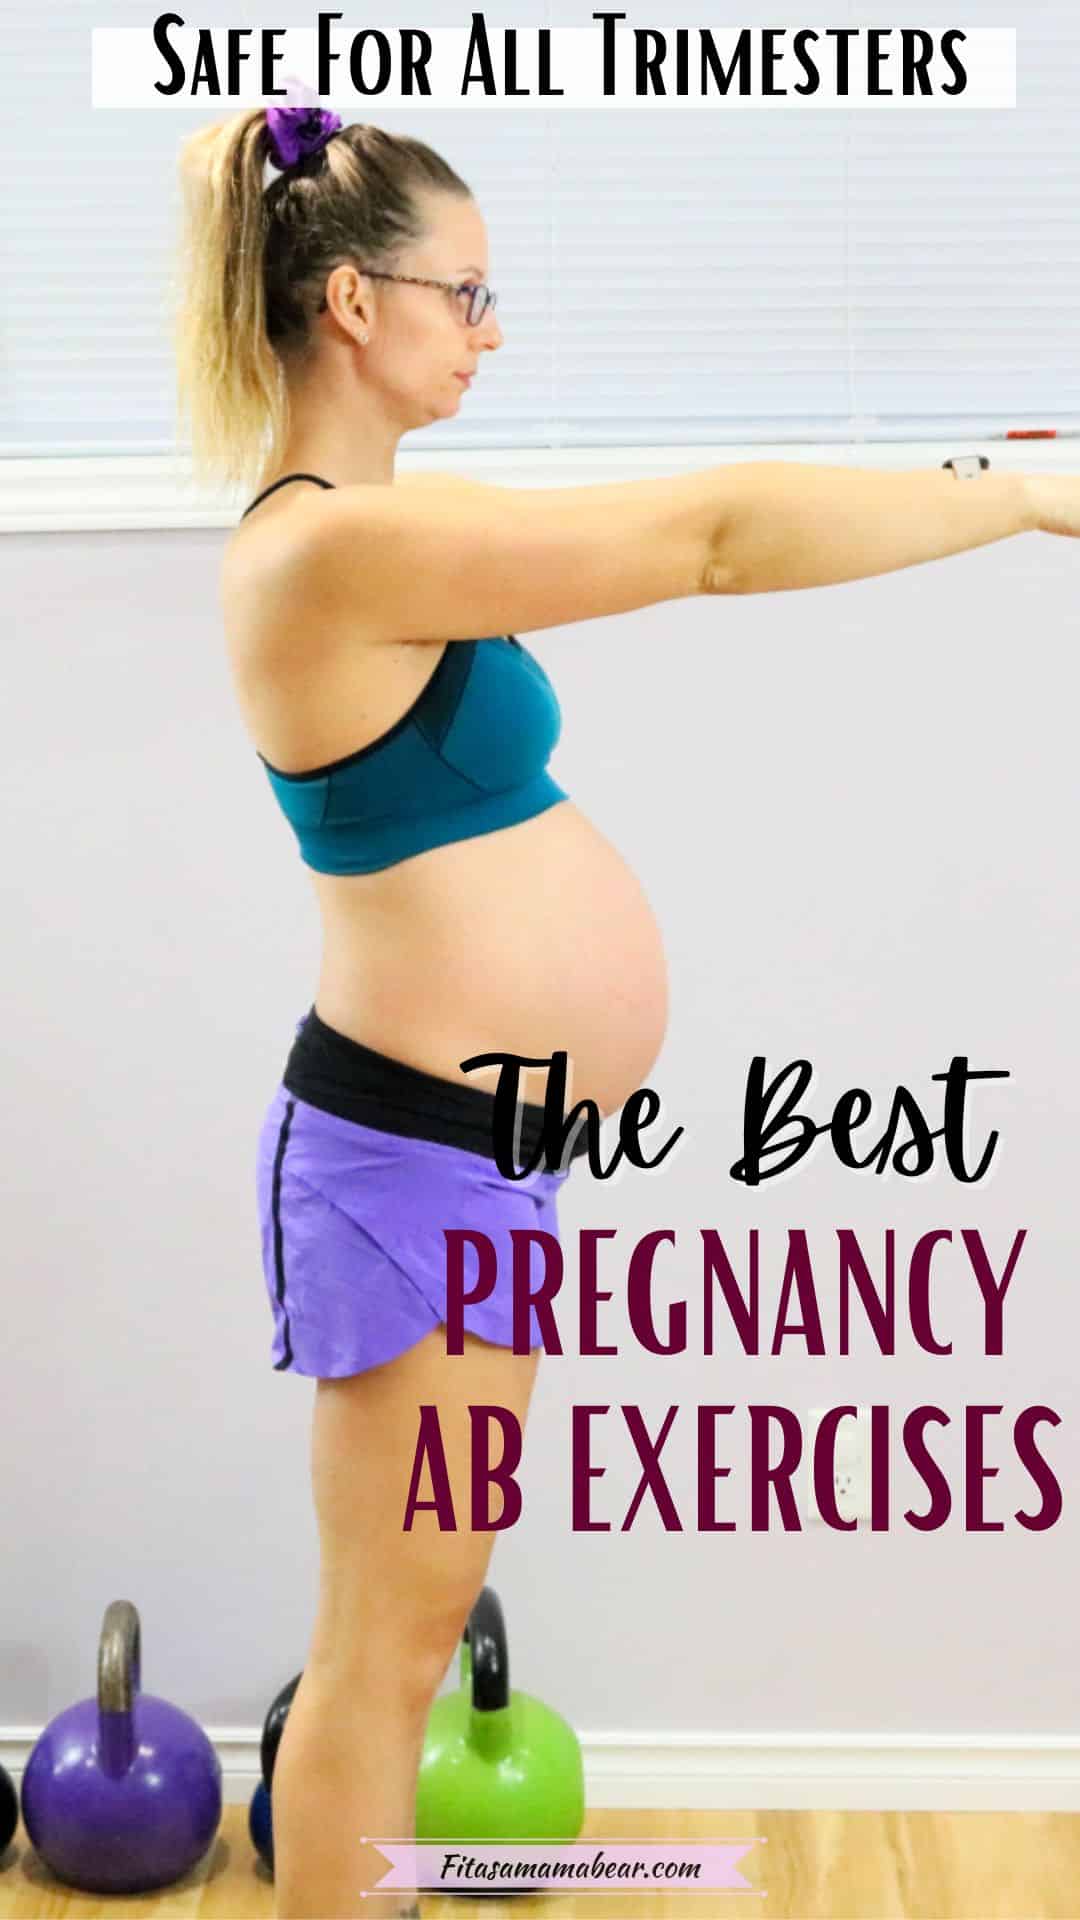 5 Minute Safe Pregnancy Core Workout For Every Trimester